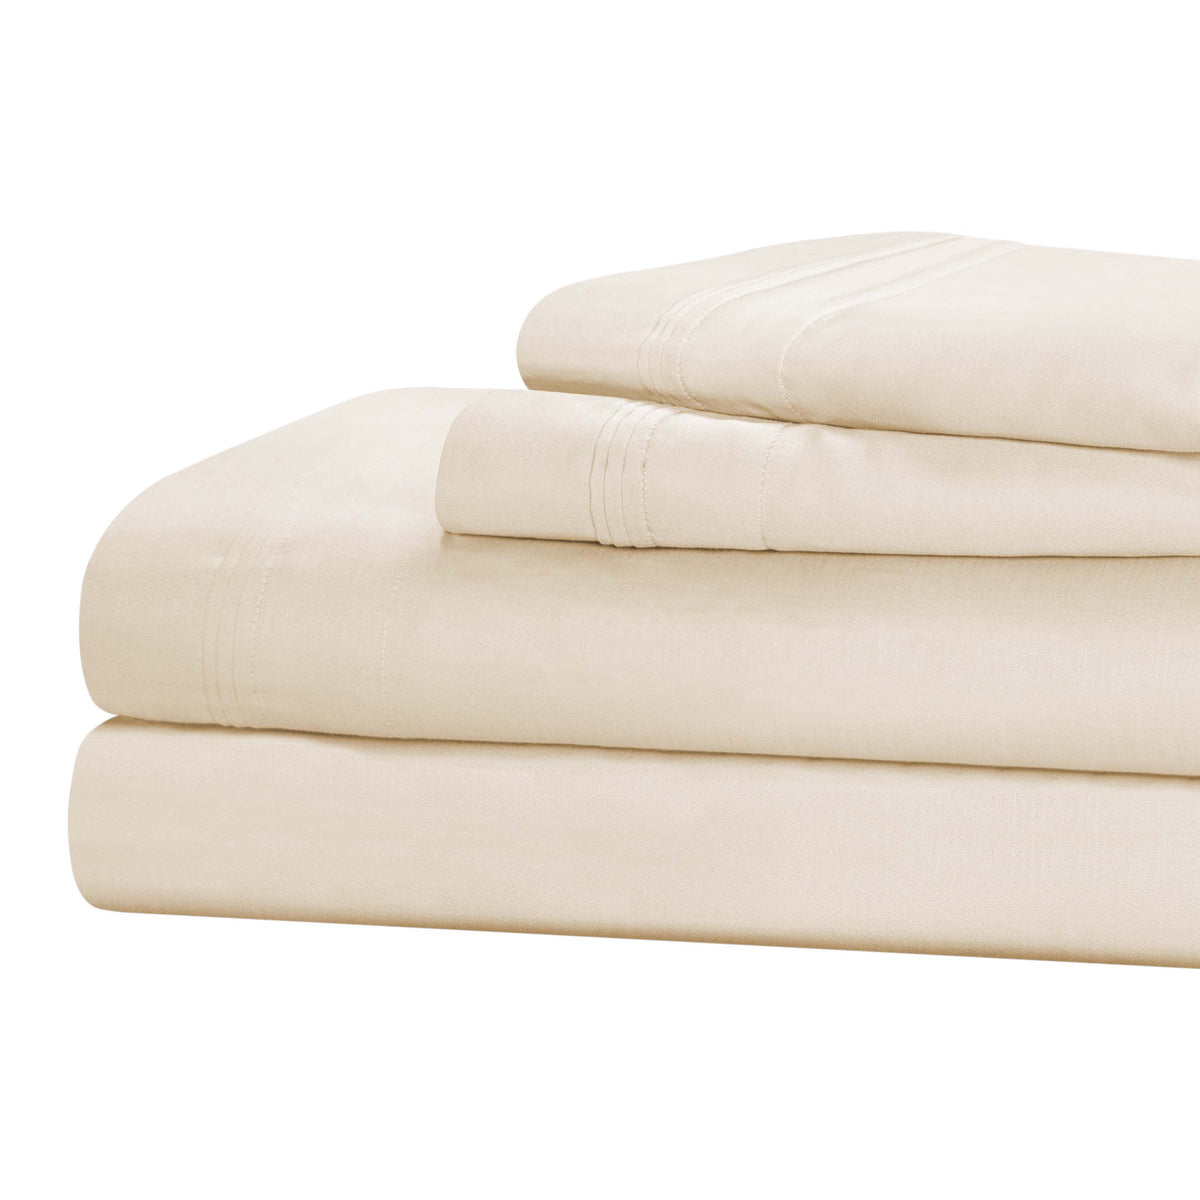 Egyptian Cotton 1500 Thread Count Eco Friendly Solid Sheet Set - Ivory